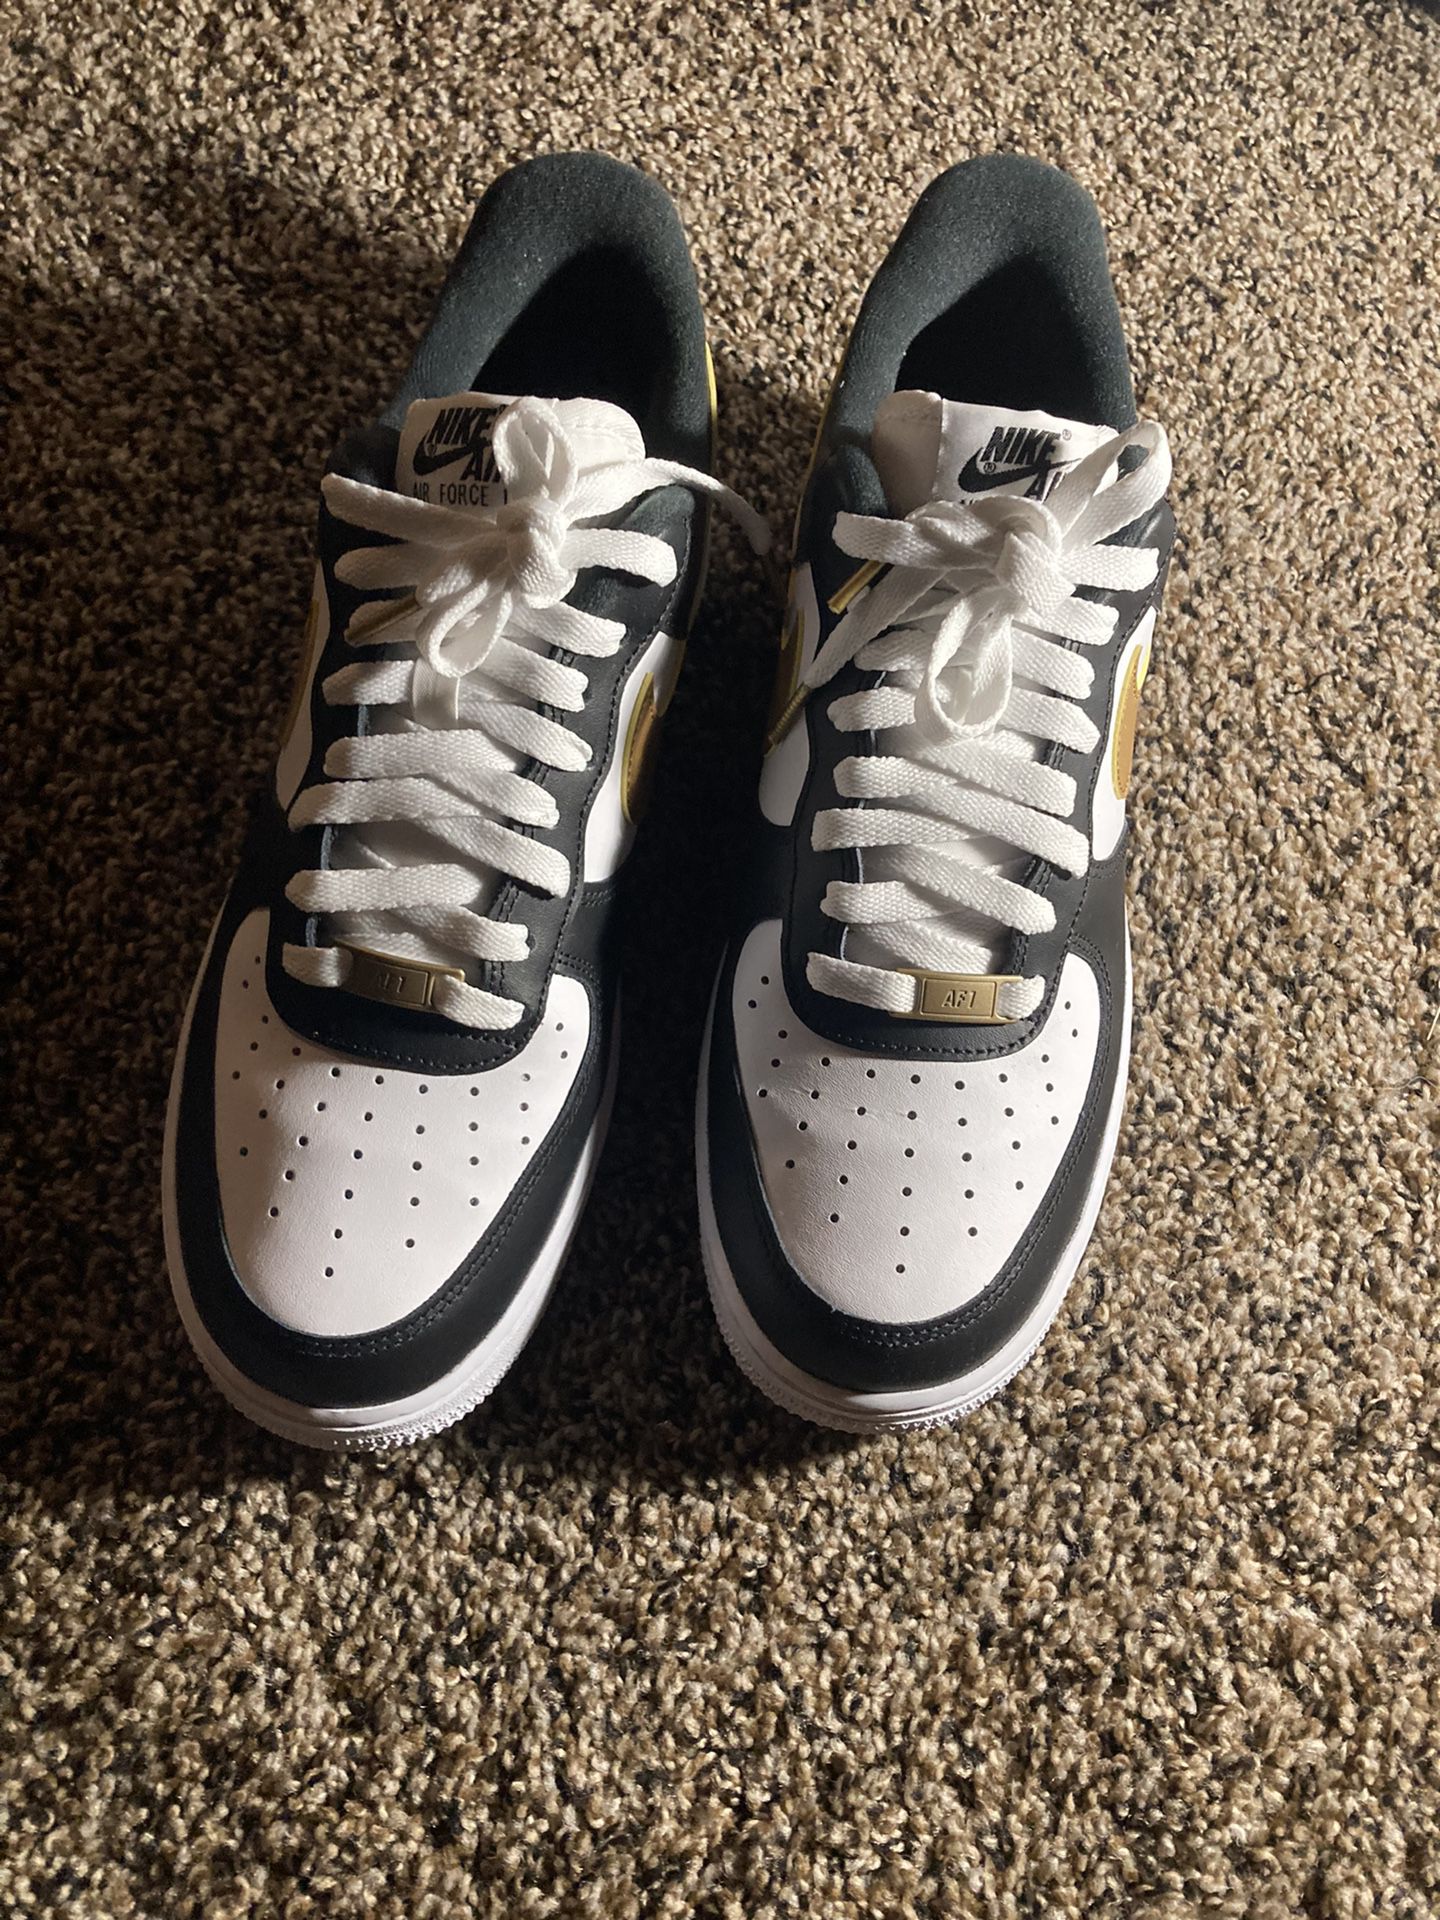 Nike Air Force 1 Low WTLA size 7.5 DS for Sale in Houston, TX - OfferUp